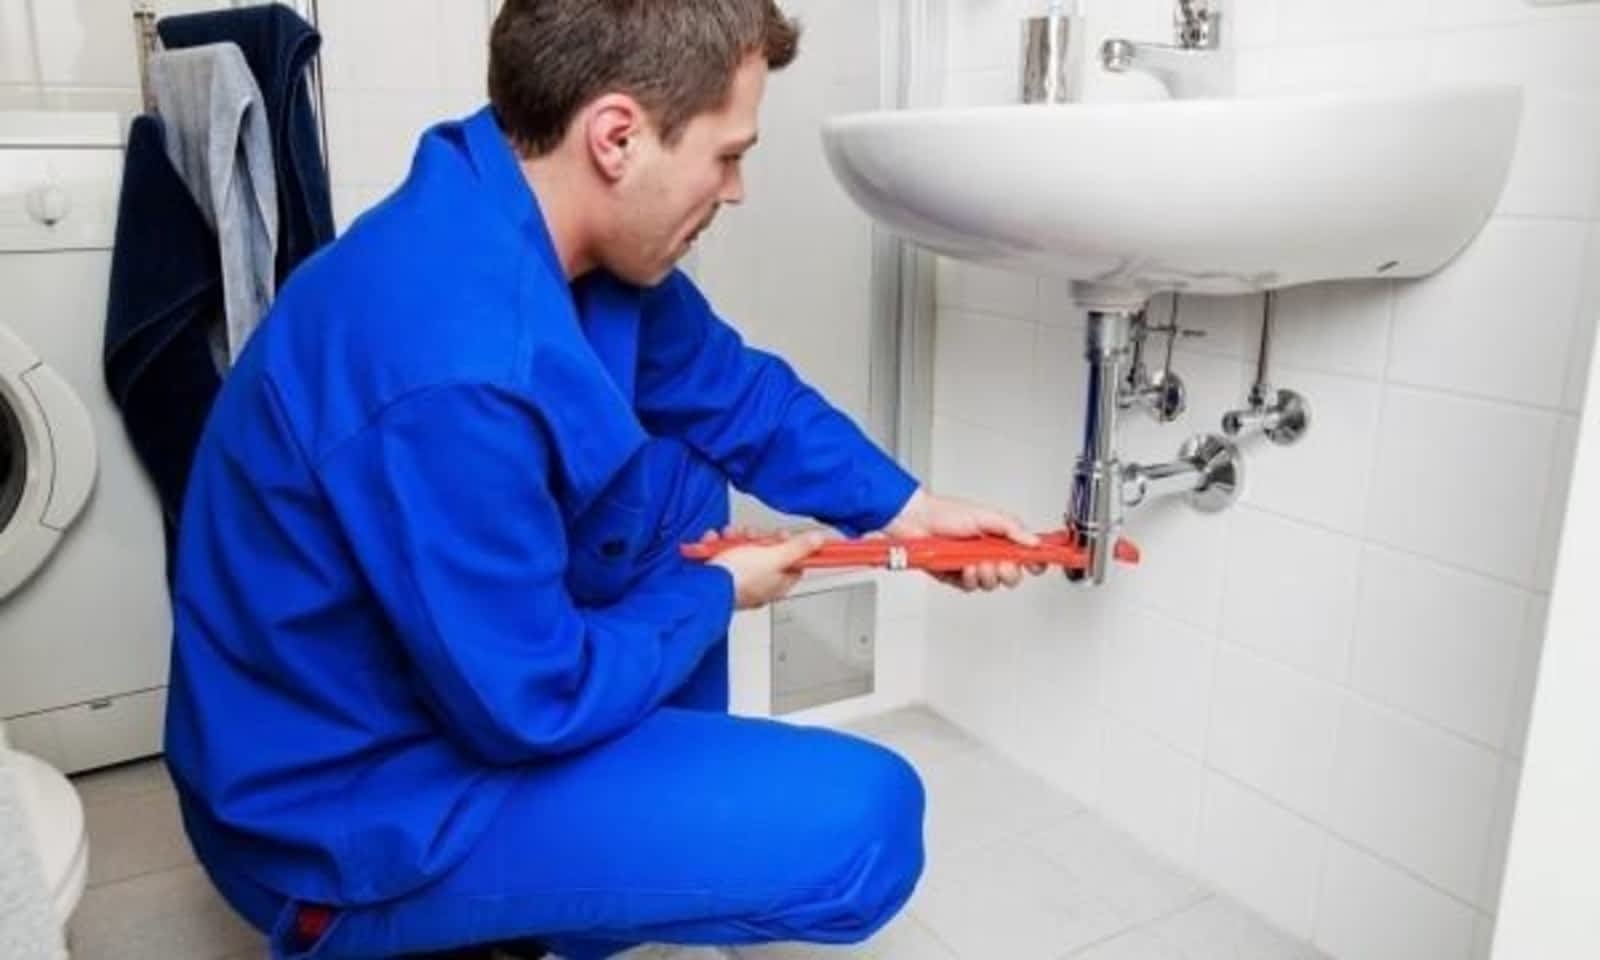 10 Awesome Tips About How Much Does A Plumber Make A Year From Unlikely Sources